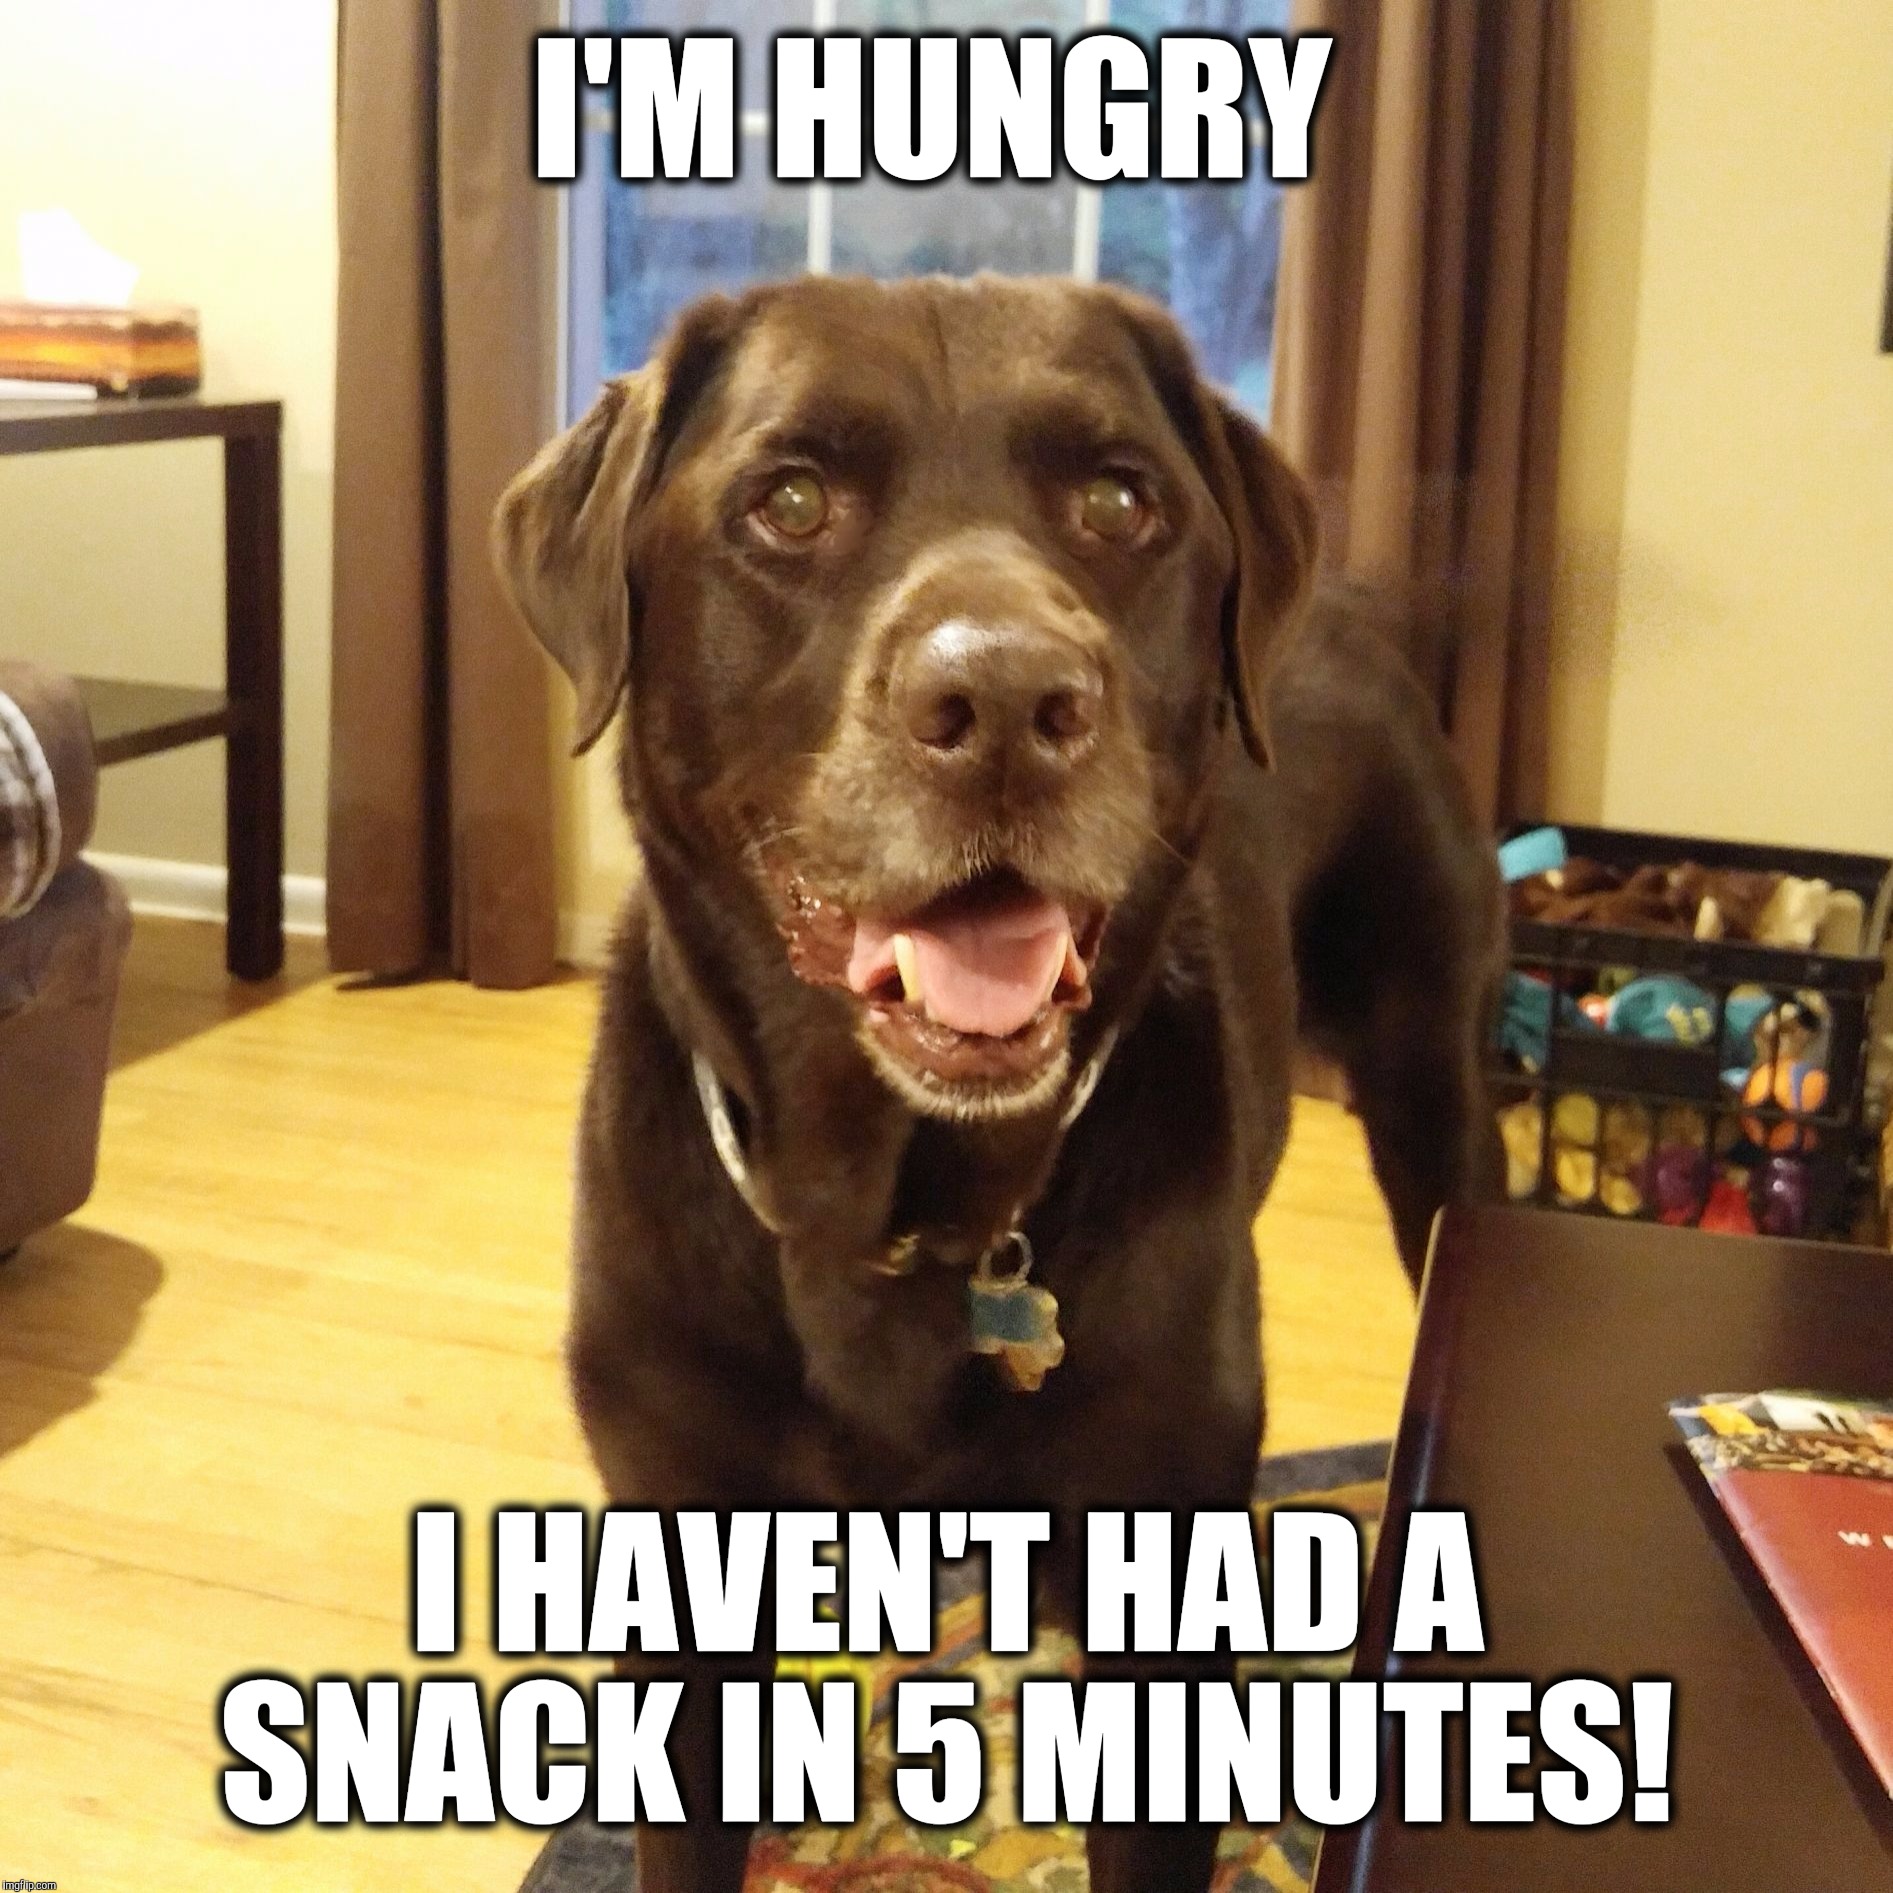 I'm hungry!  | I'M HUNGRY; I HAVEN'T HAD A SNACK IN 5 MINUTES! | image tagged in chuckie the chocolate lab,hungry,snacks,funny,dog memes,funny dogs | made w/ Imgflip meme maker